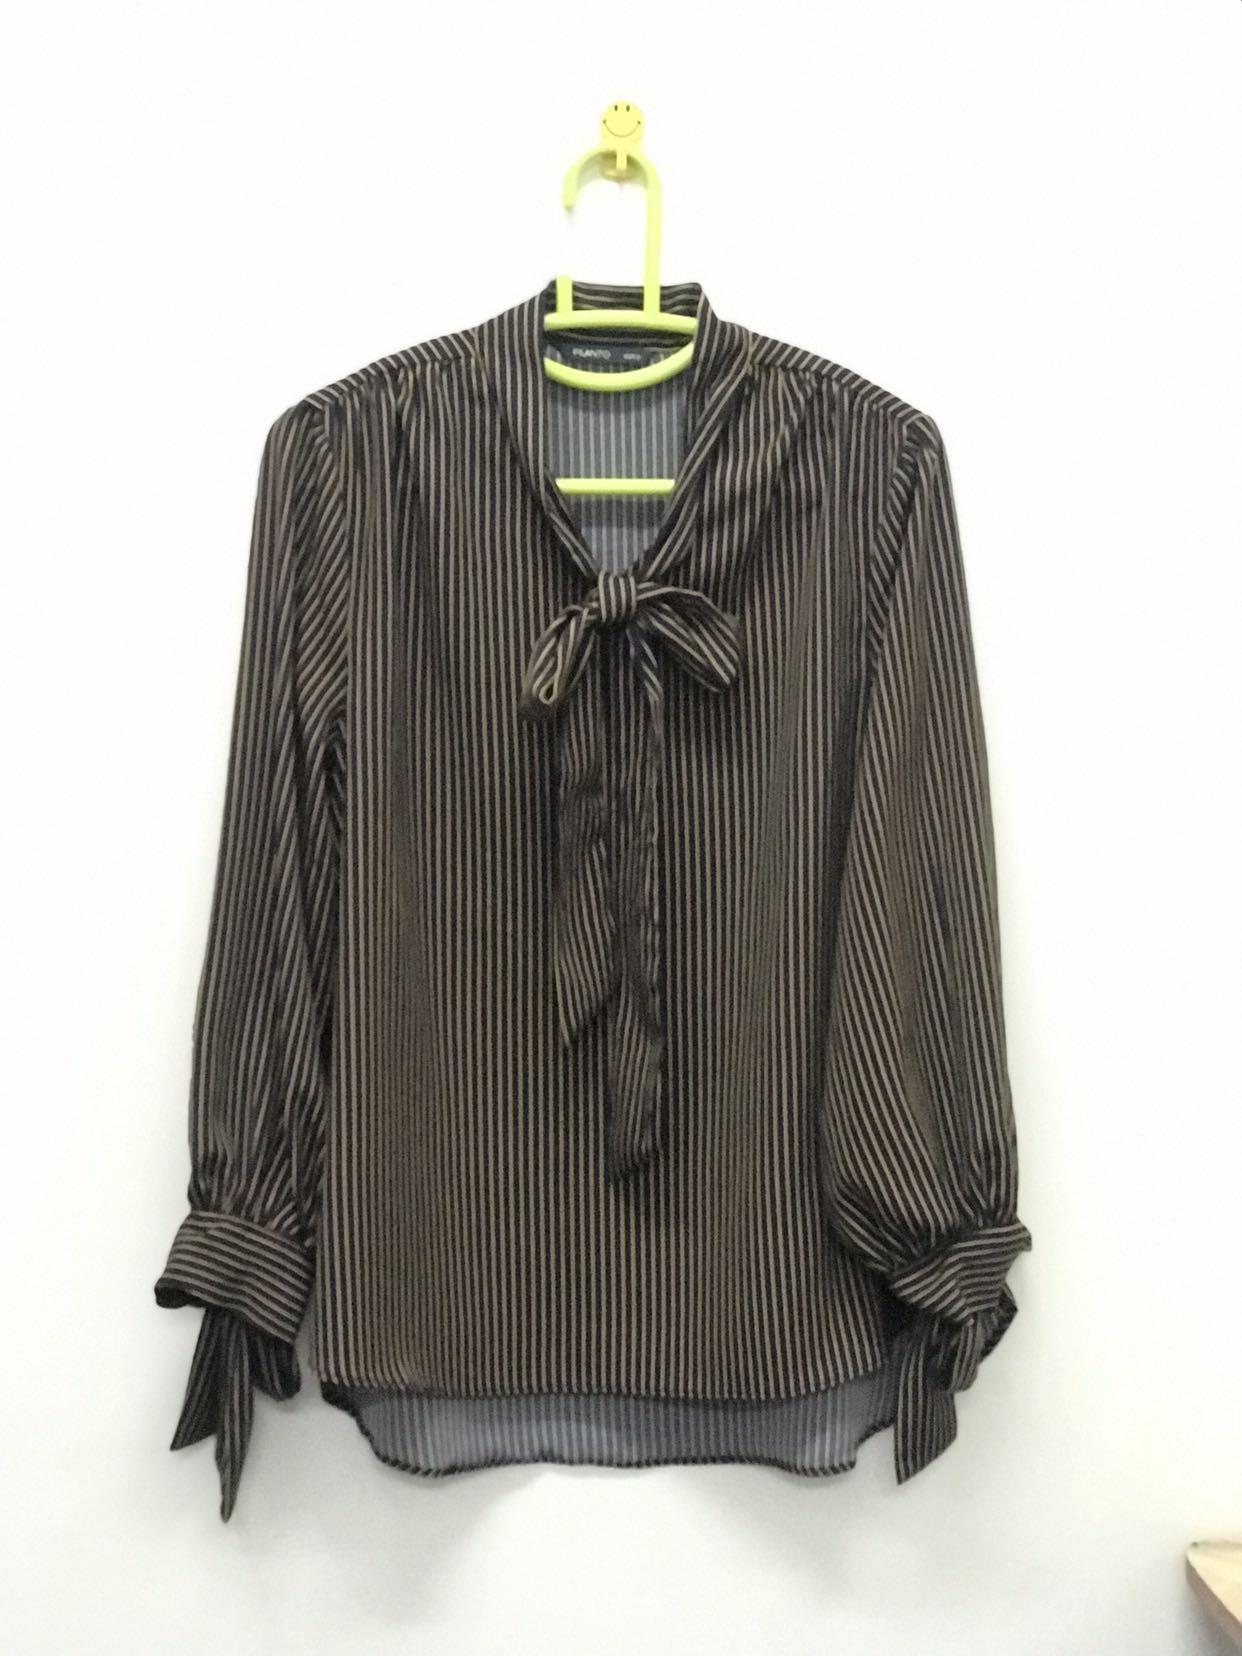 Stripe Blouse Women S Fashion Clothes Tops On Carousell